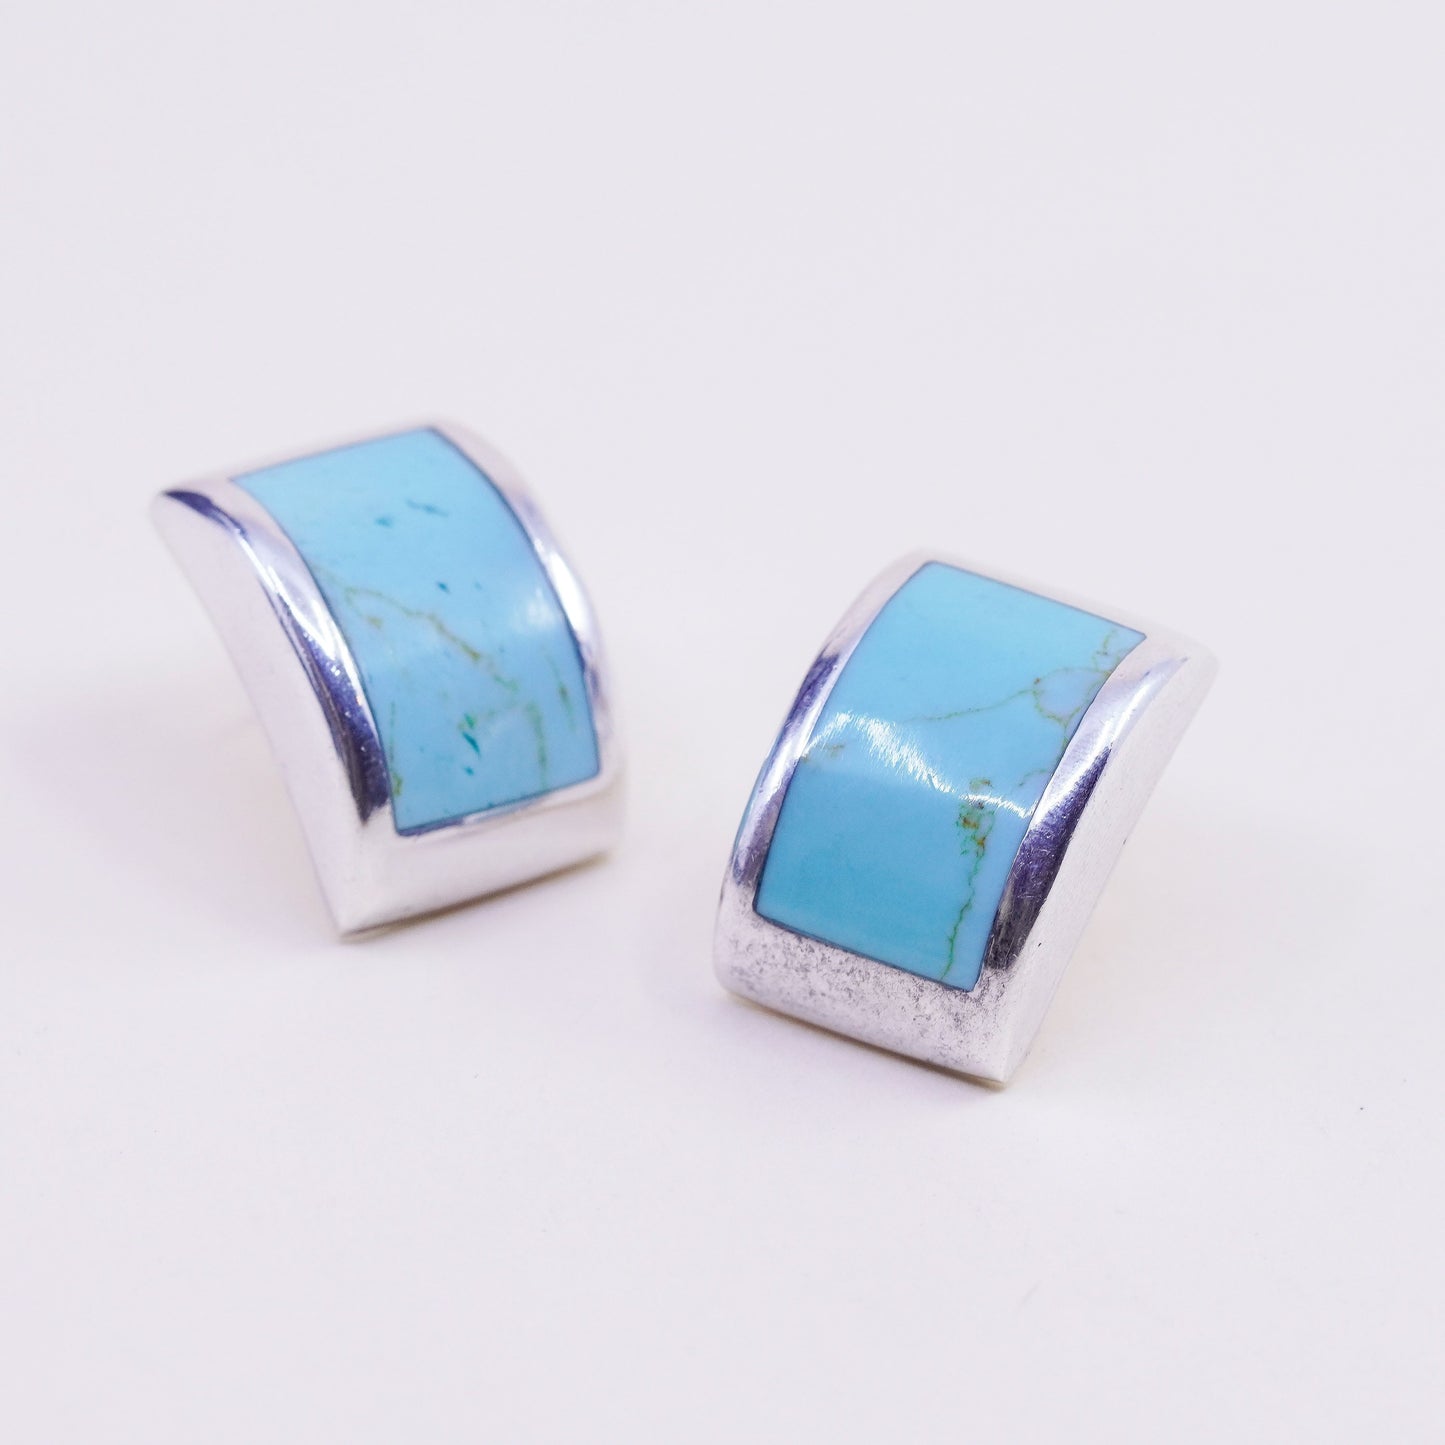 Vintage Sterling silver handmade earrings, Mexico 925 square studs w/ turquoise